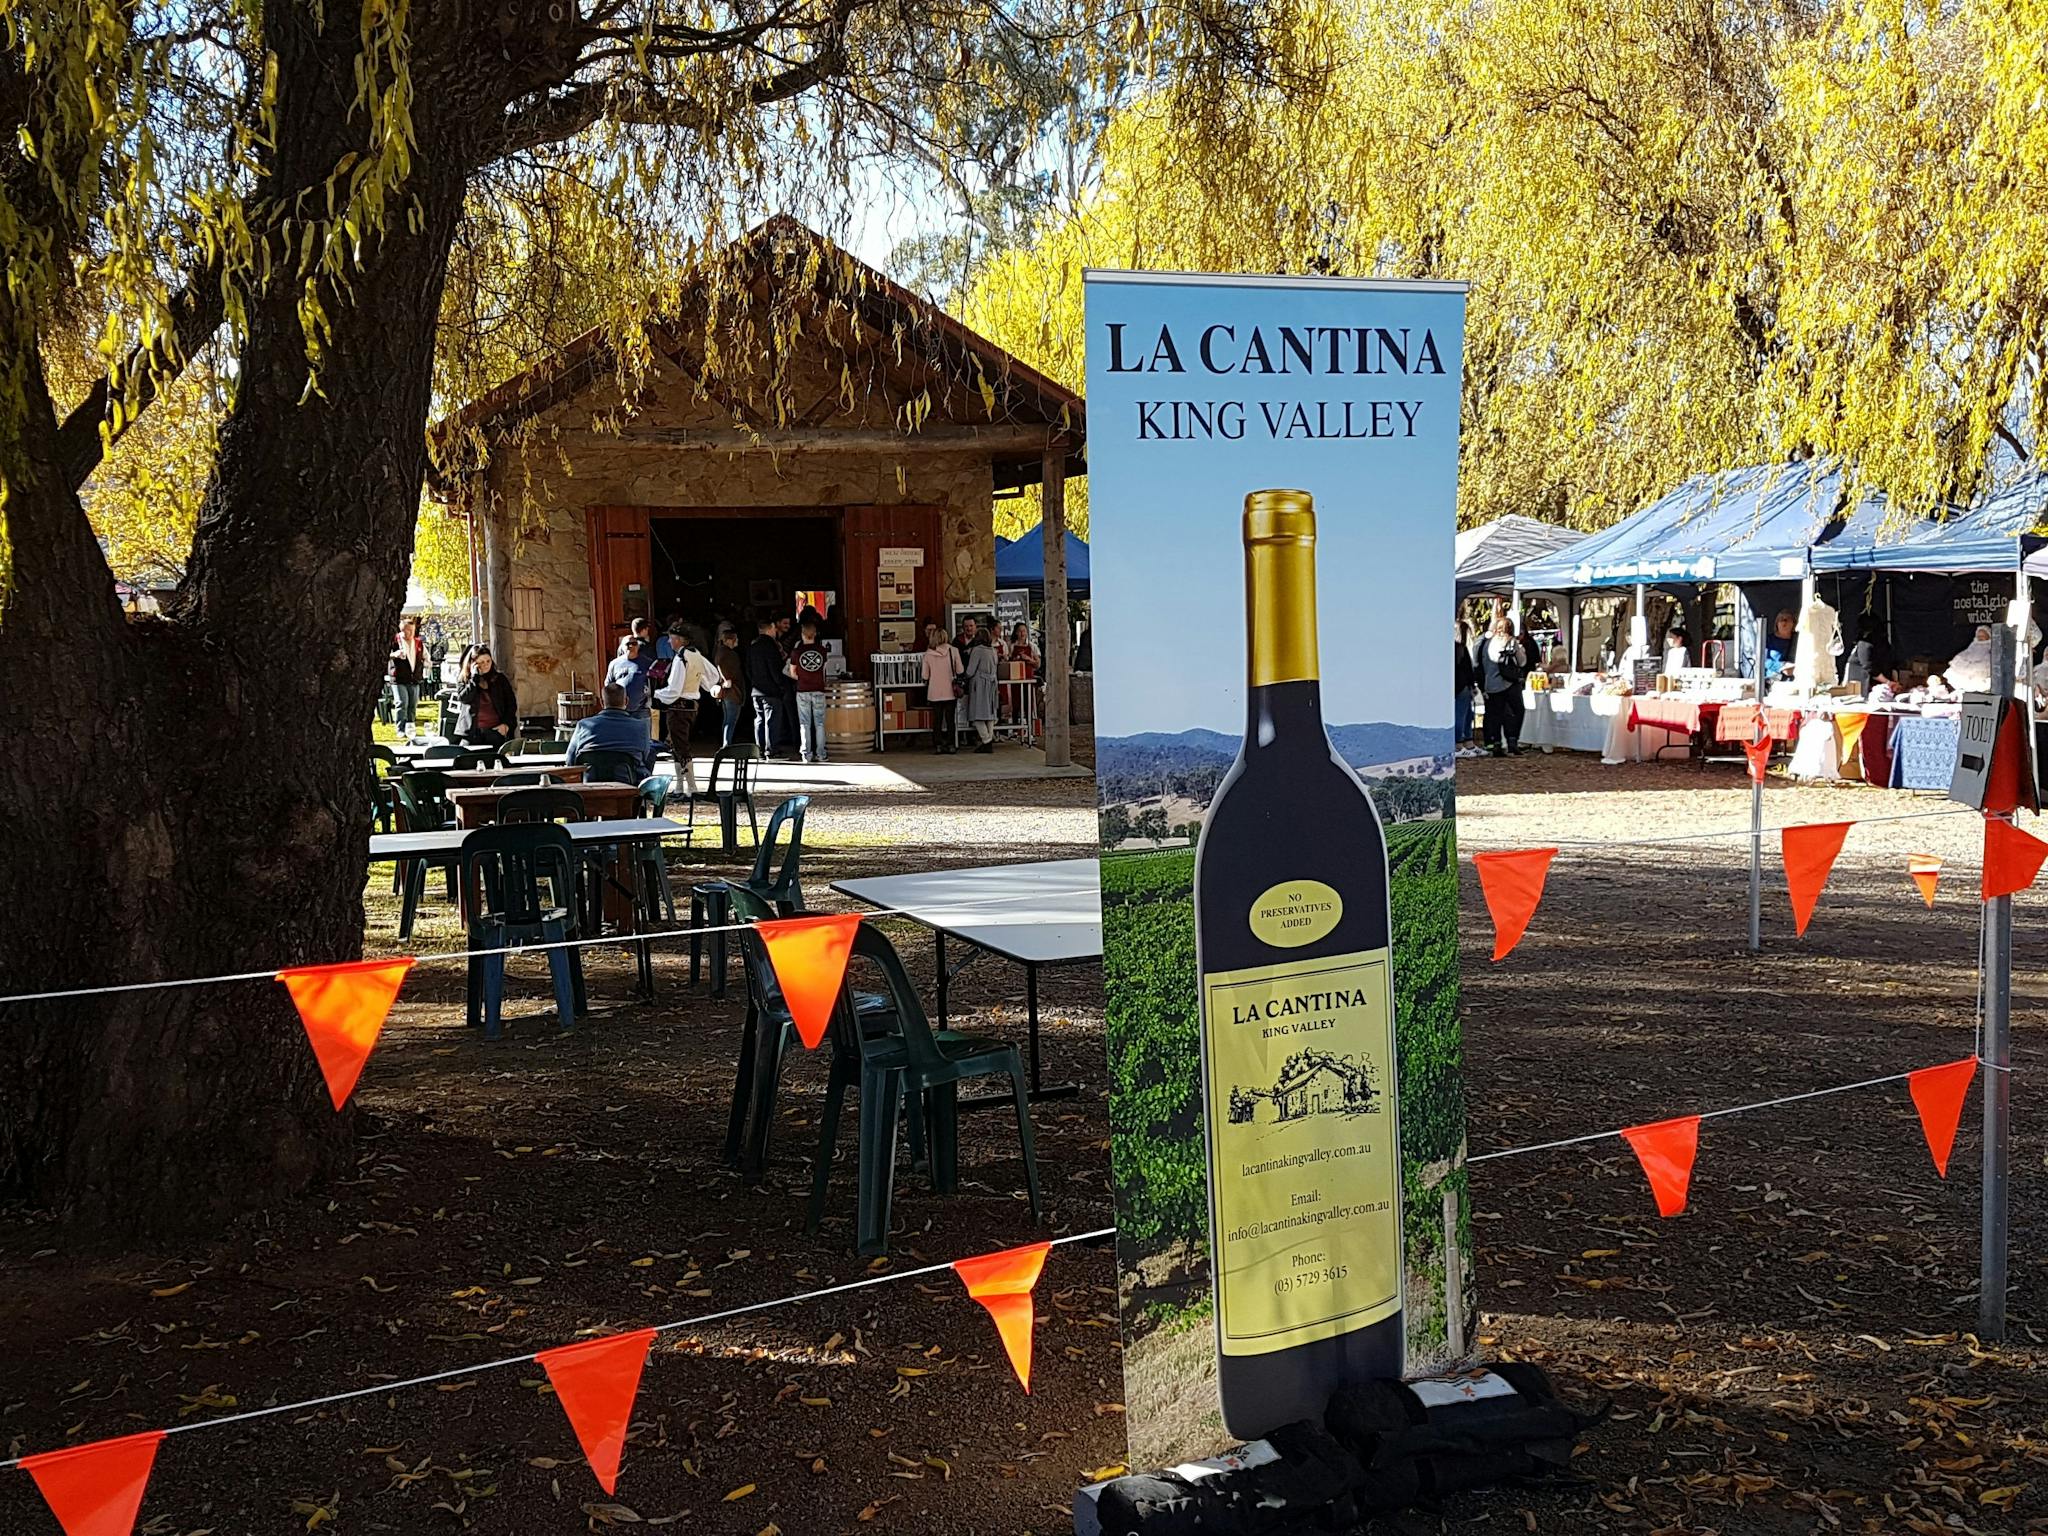 Fit for a King Weekend, King Valley at La Cantina Winery